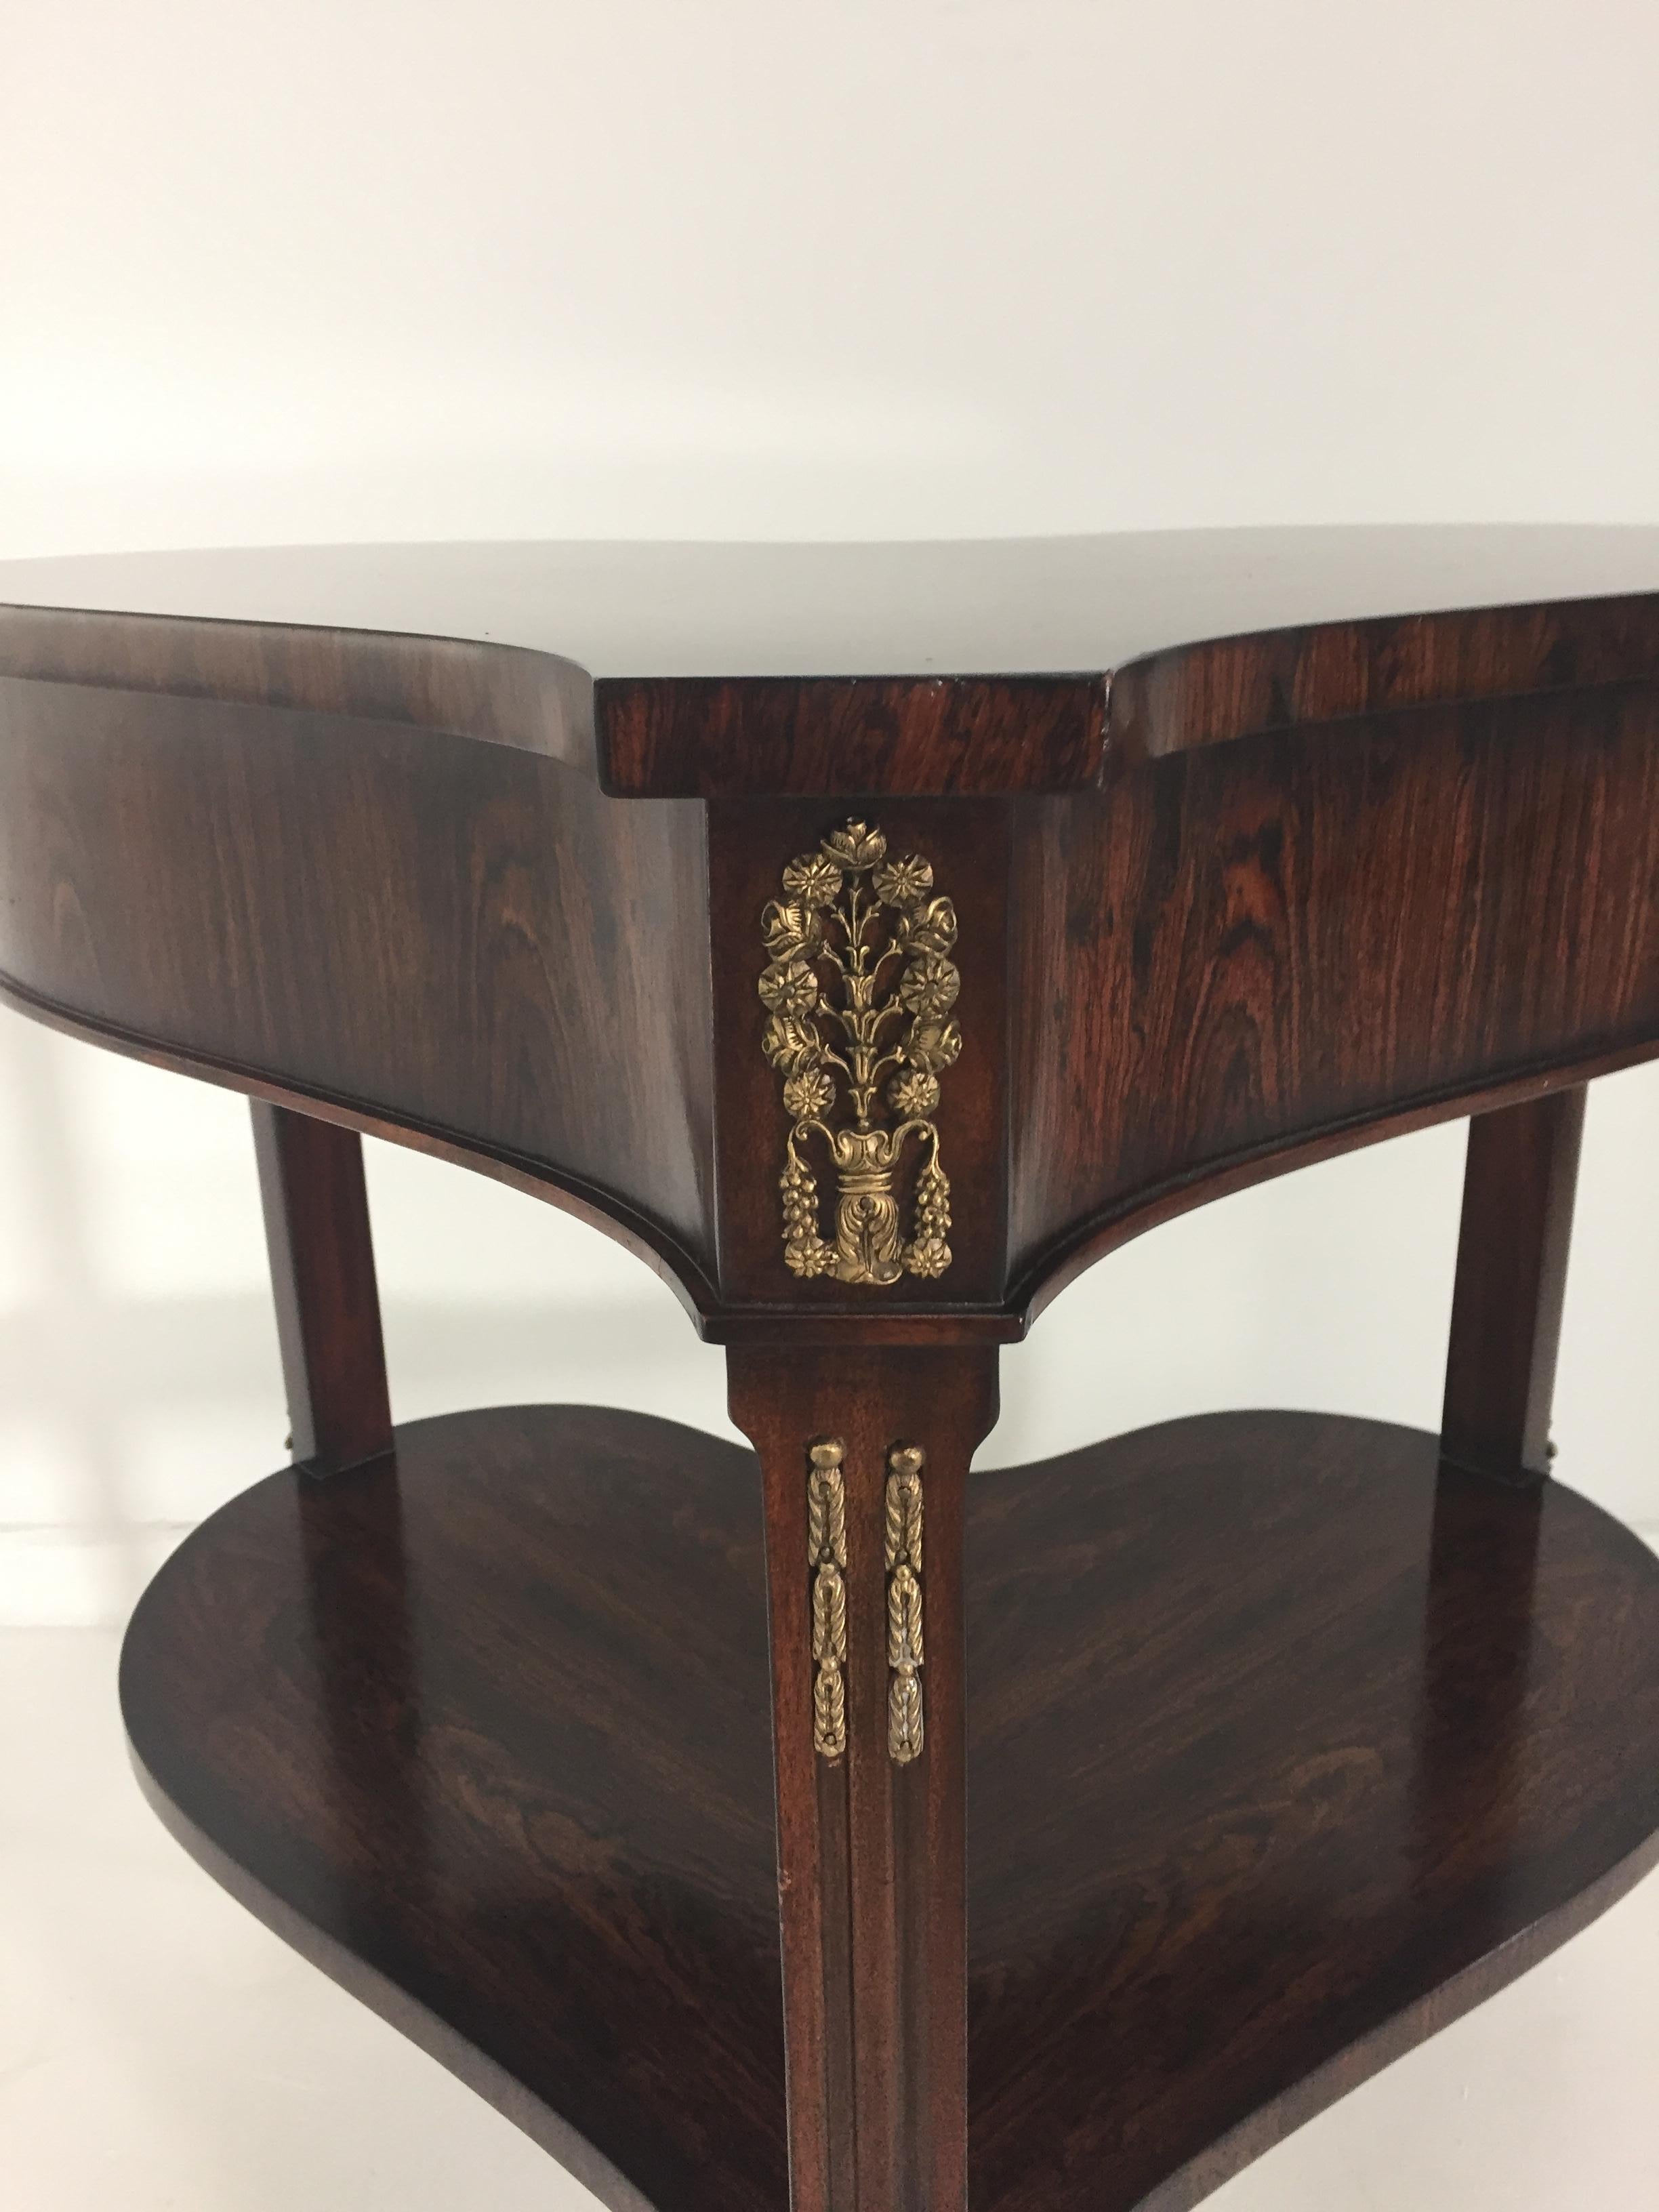 A gorgeous romantically shaped two-tier side table in rich mahogany, embellished with bronze mounts and fabulous ornate paw feet.
Measures: 2nd shelf is 10.25 H from floor.